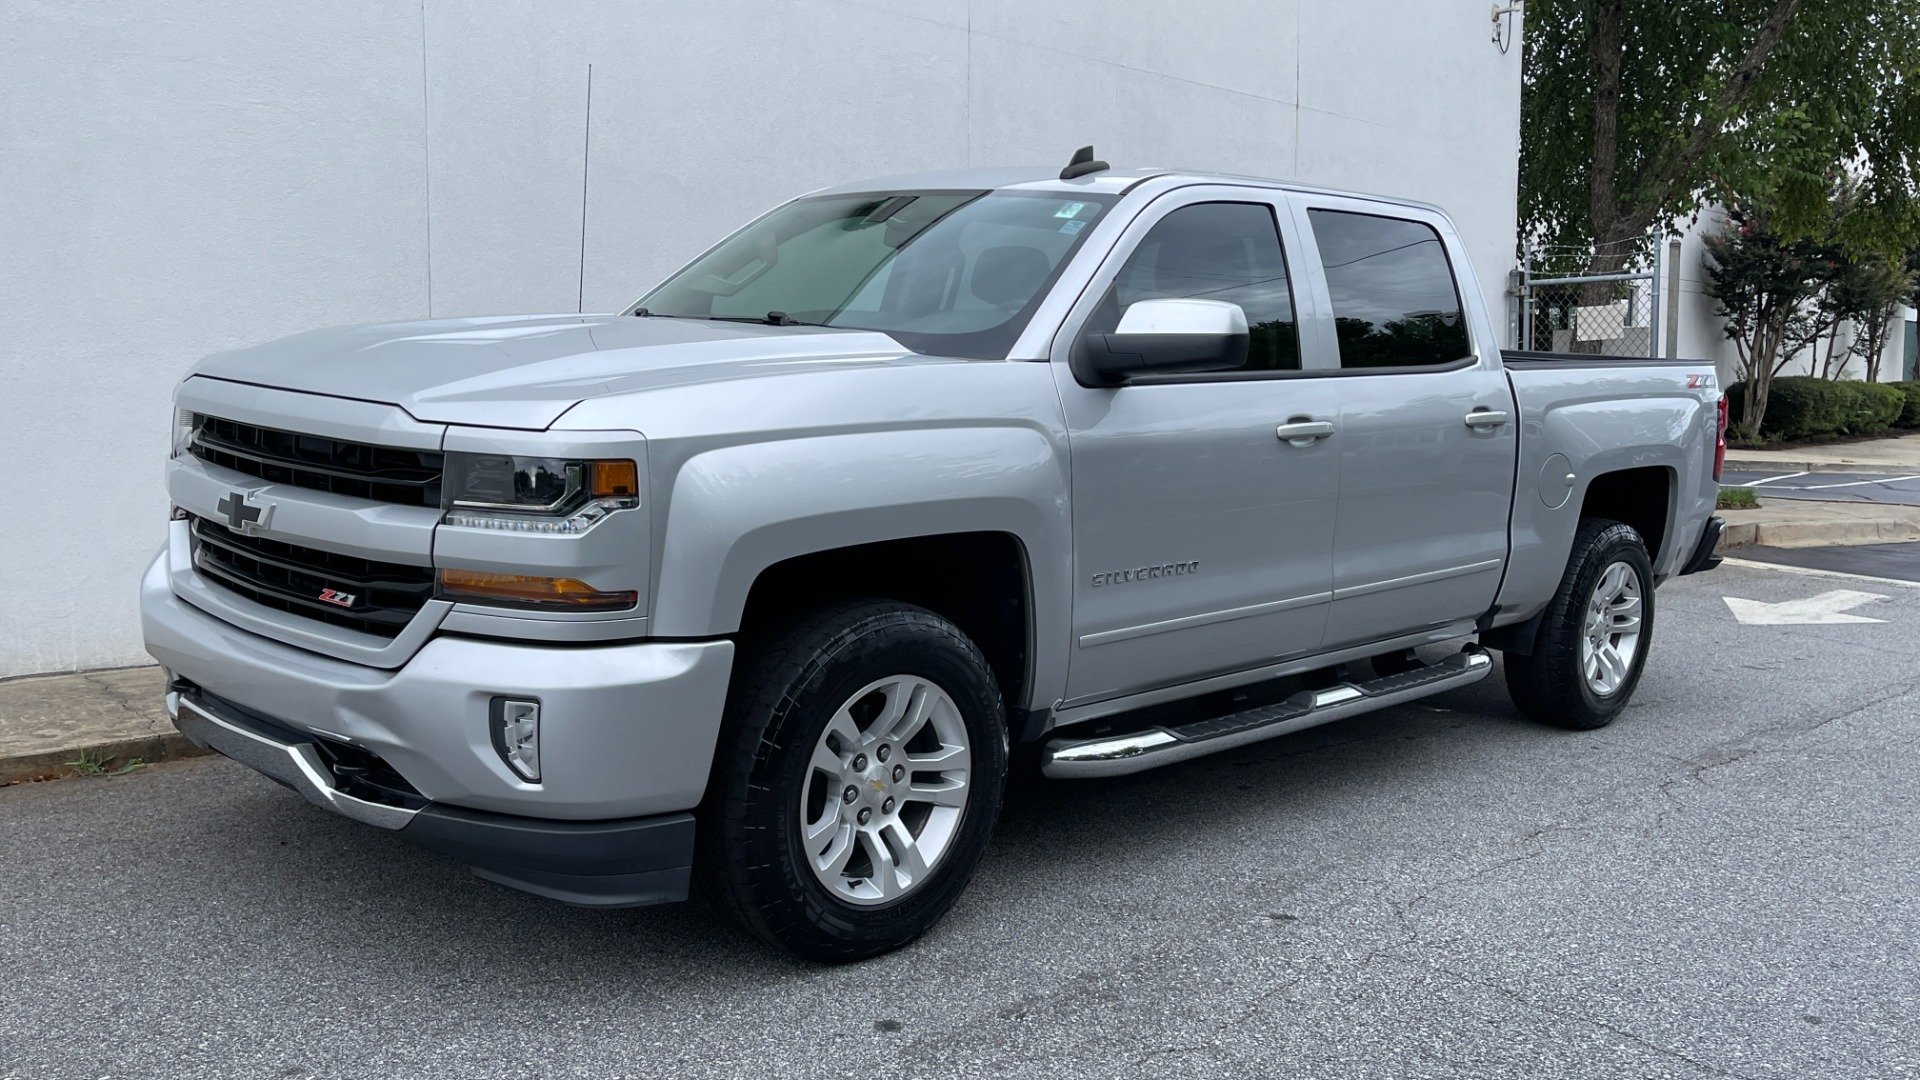 Used 2018 Chevrolet Silverado 1500 LT / 5.3L V8 / 4WD / ALL STAR EDITION / BOSE SOUND / BLACK EMBLEMS / for sale Sold at Formula Imports in Charlotte NC 28227 1